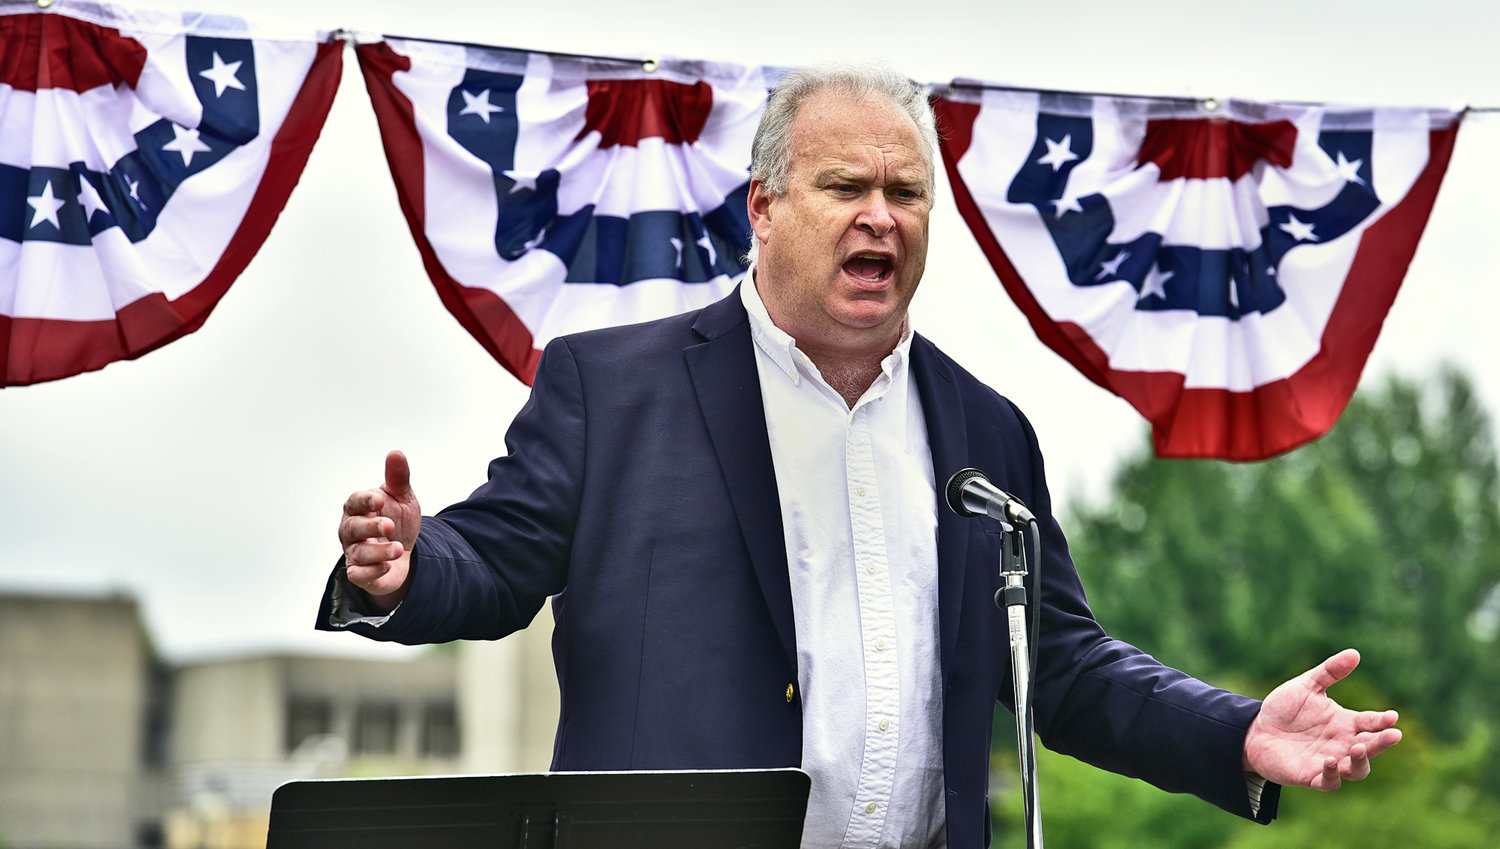 State Rep. Jim Walsh, R-Aberdeen, revs up the crowd with a passionate speech during the Freedom Rally on Saturday, July 10, on Olympia’s Capitol campus.